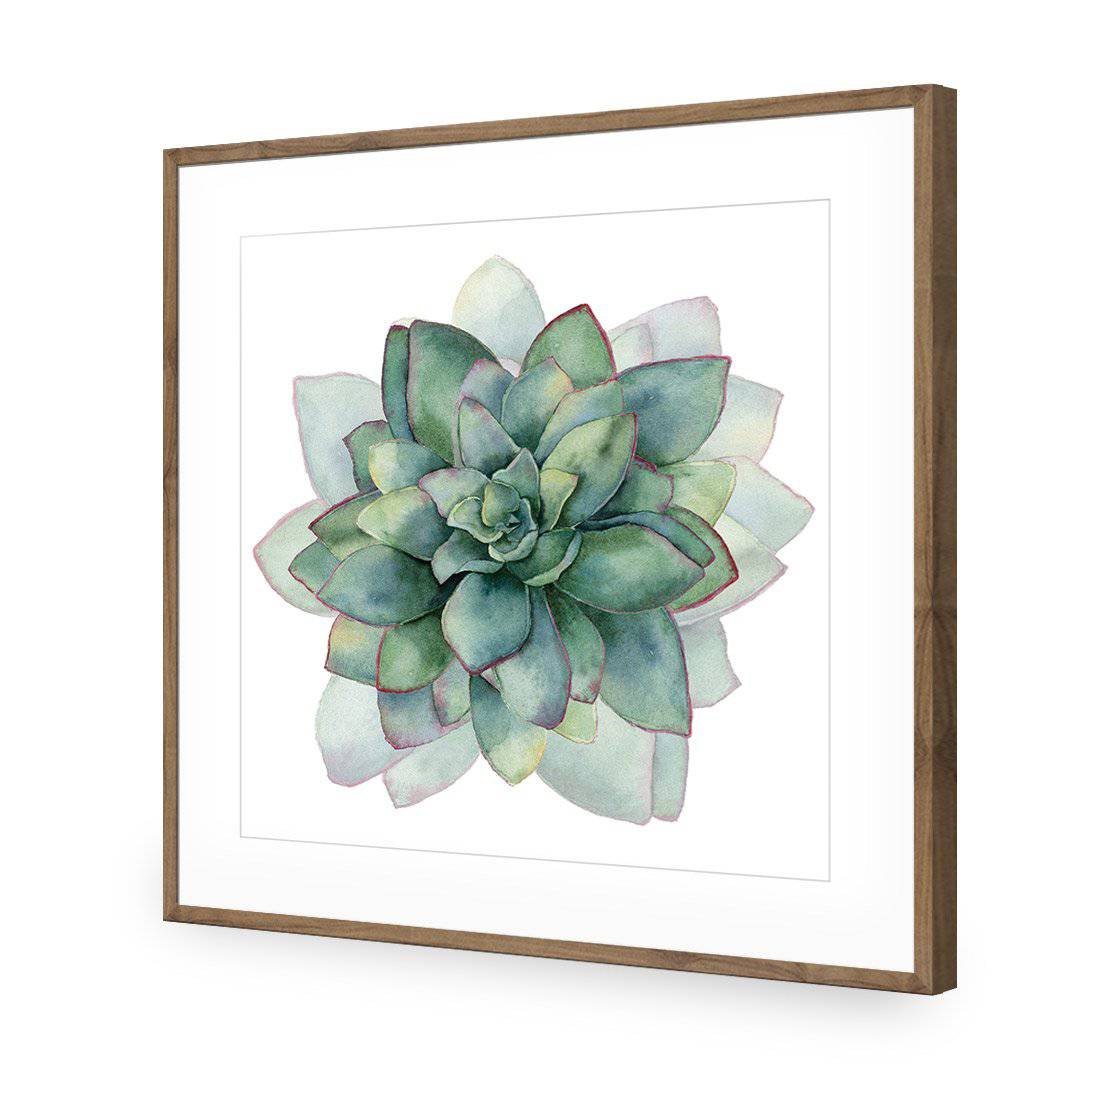 Succulent Spiral, Square-Acrylic-Wall Art Design-With Border-Acrylic - Natural Frame-37x37cm-Wall Art Designs